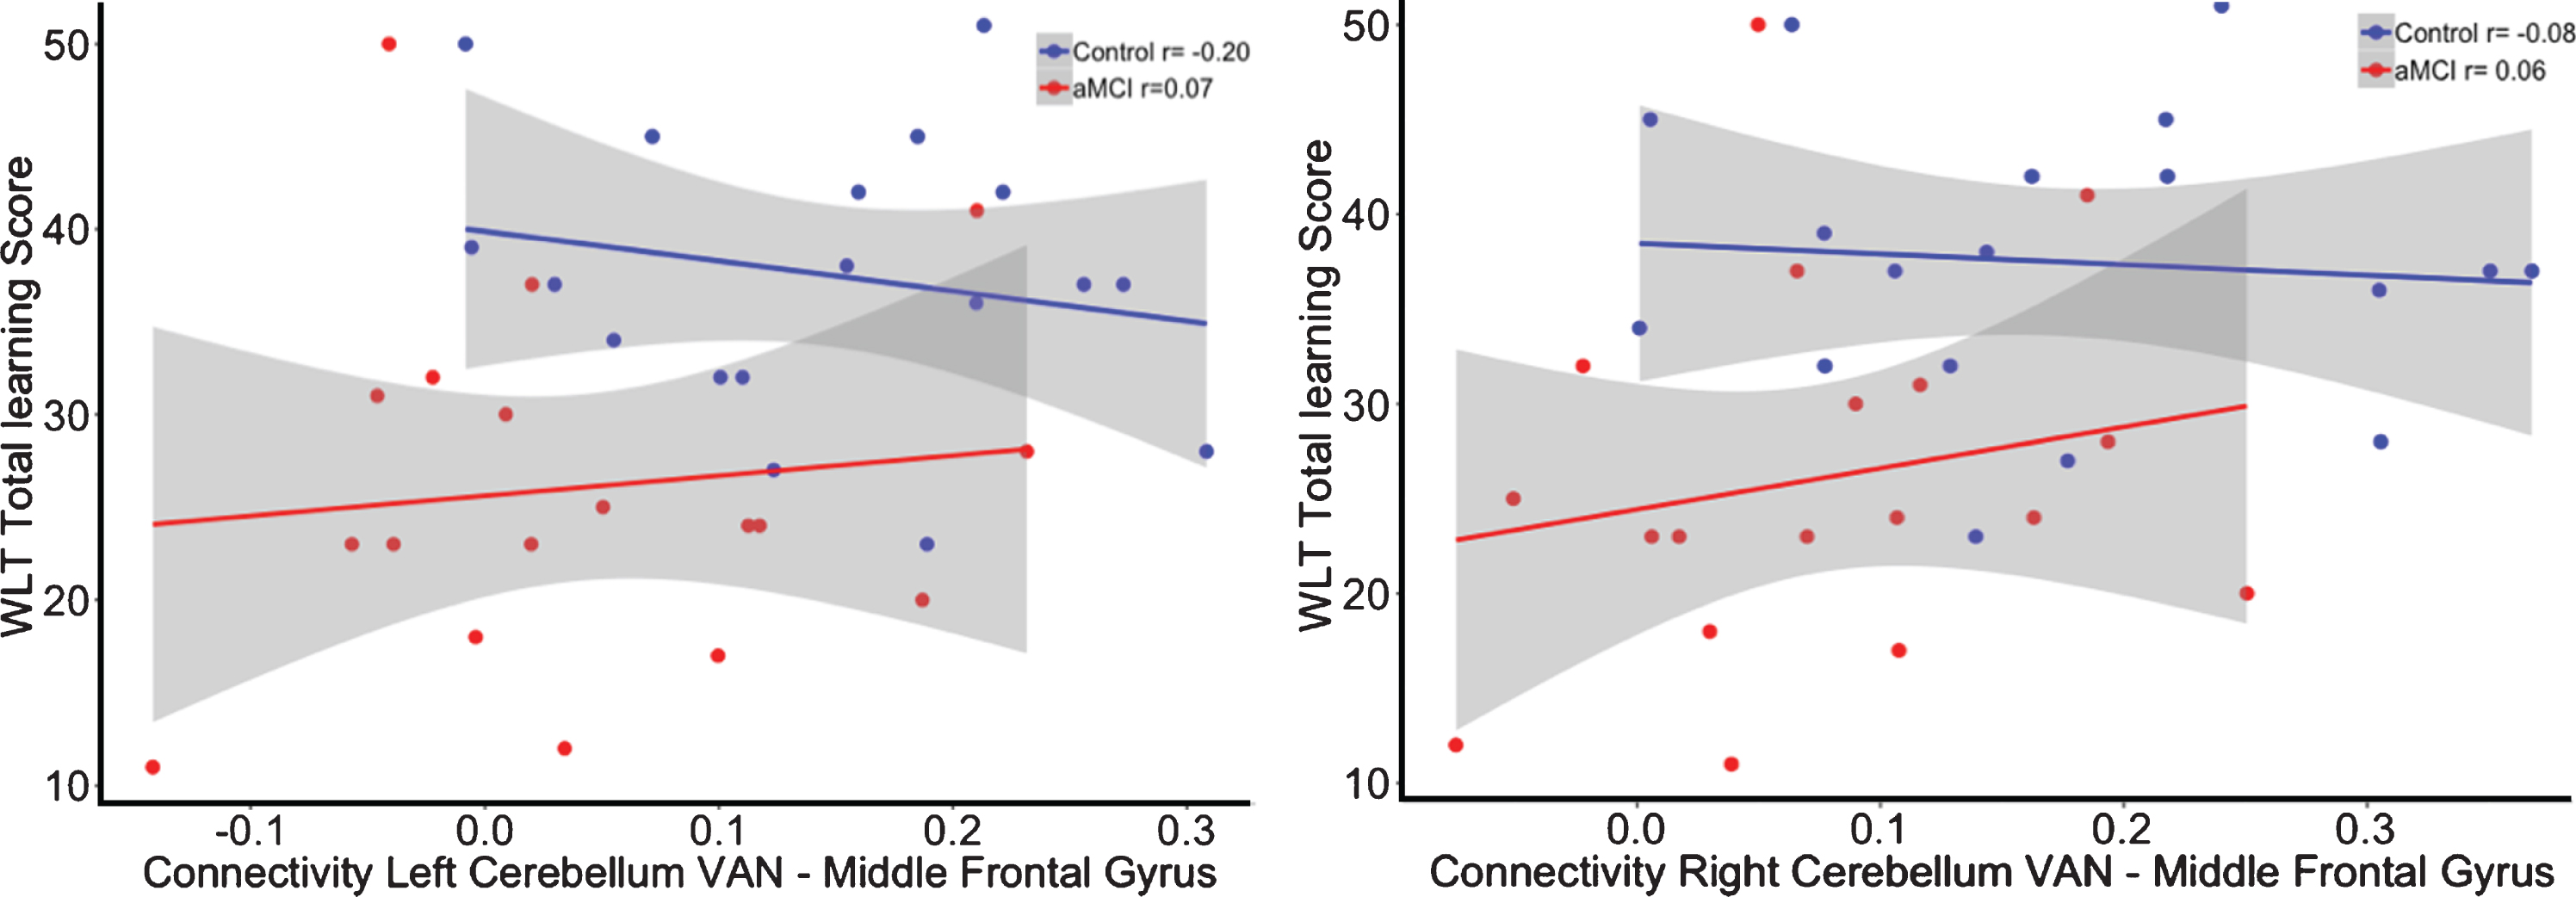 Correlation between functional connectivity between the right cerebellum VAN and middle frontal gyrus and performance on the WLT total learning for healthy controls (blue) and aMCI patients (red). No significant interaction was observed between the cerebellar VAN and middle frontal gyrus on memory performance.